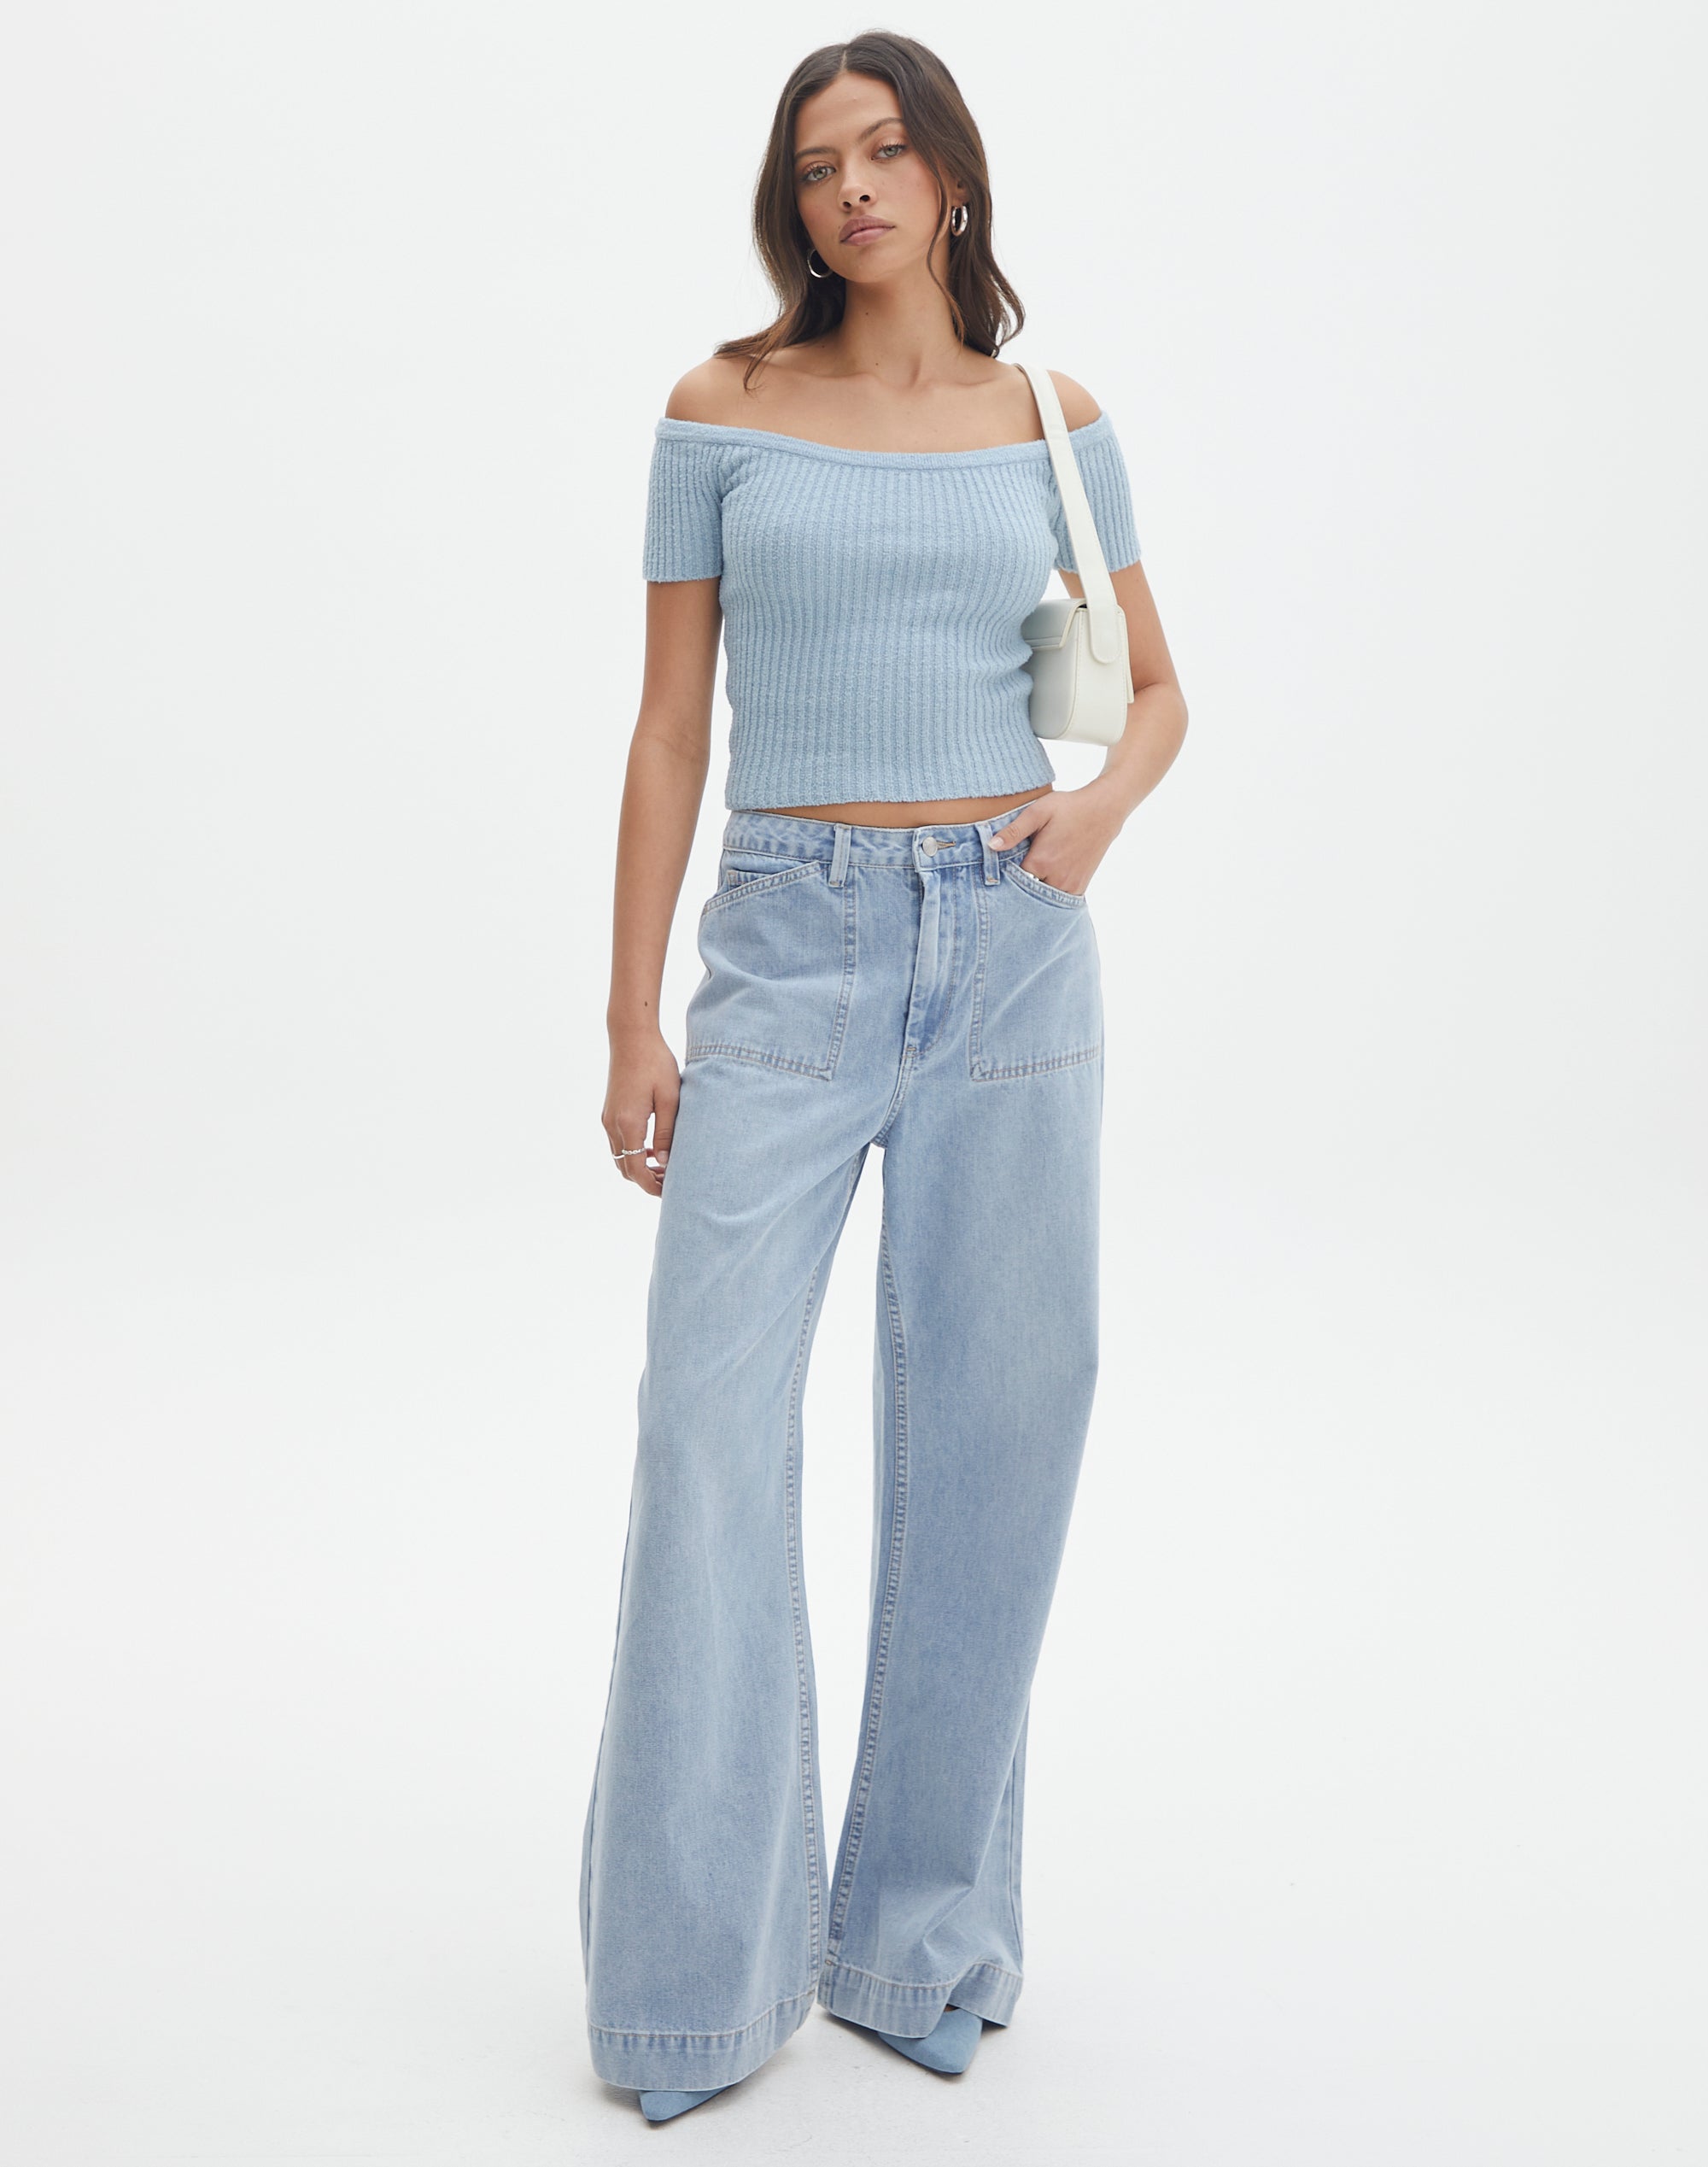 Knit Off The Shoulder Crop Top in Blue Bubble